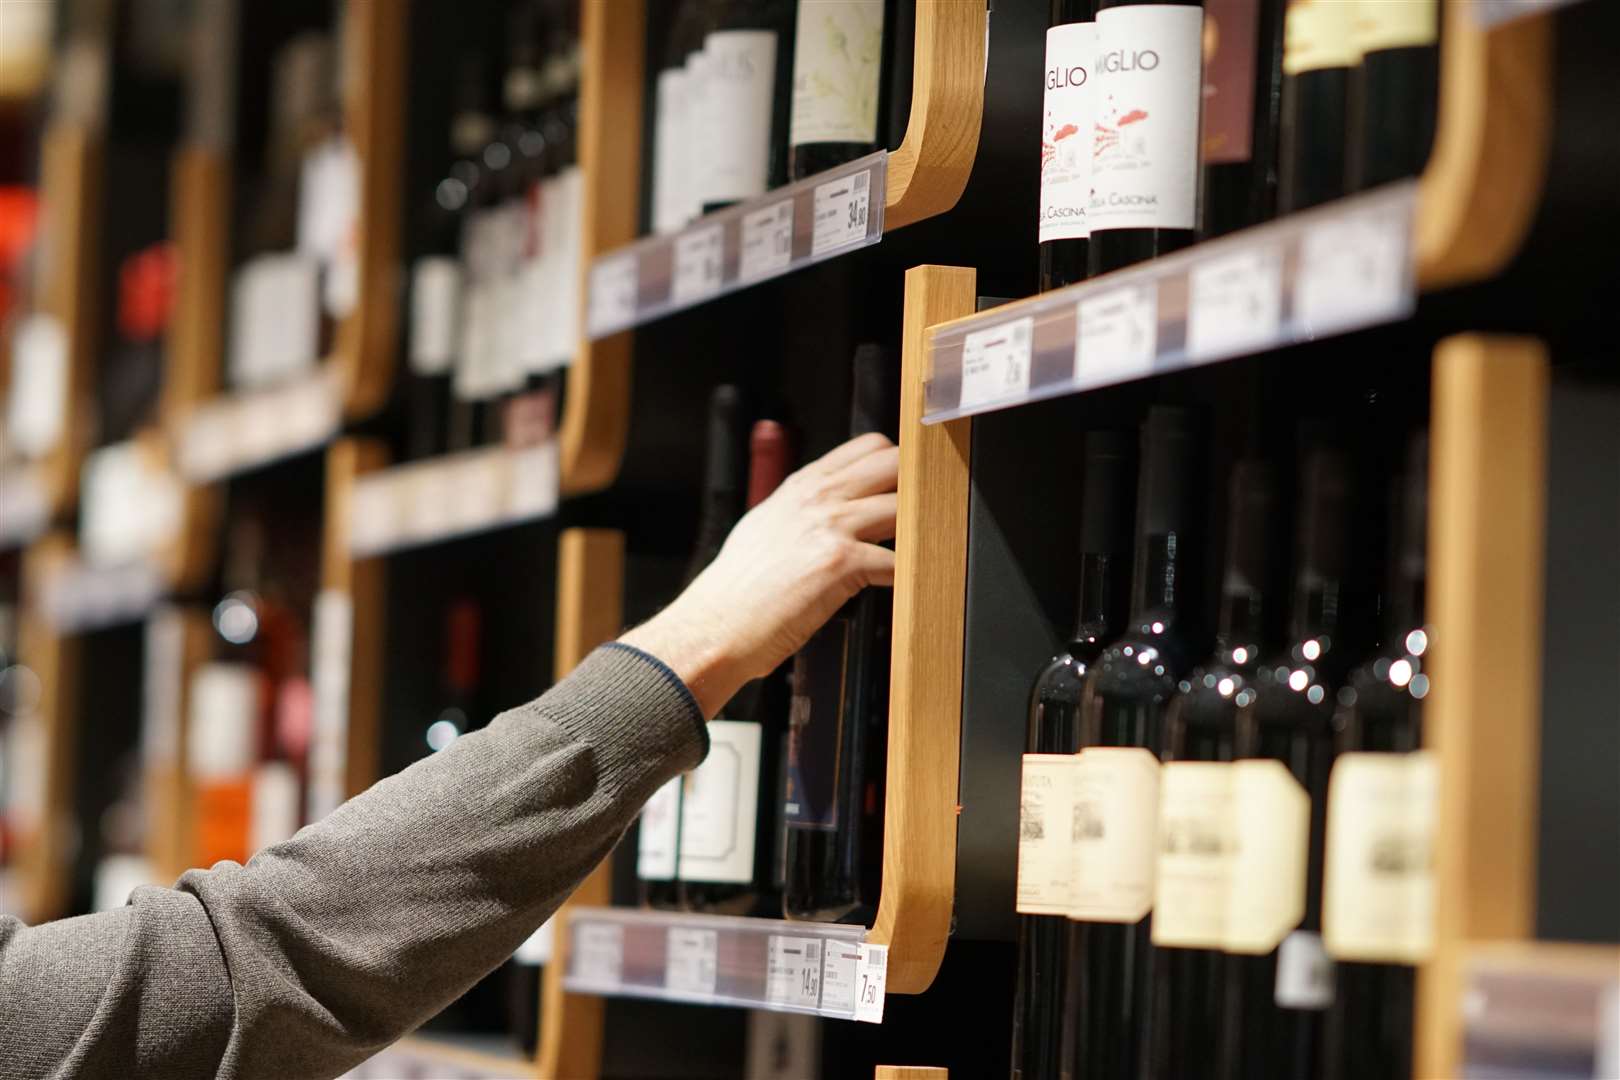 There may be a good reason the range of wines on offers sometimes seems "limited".